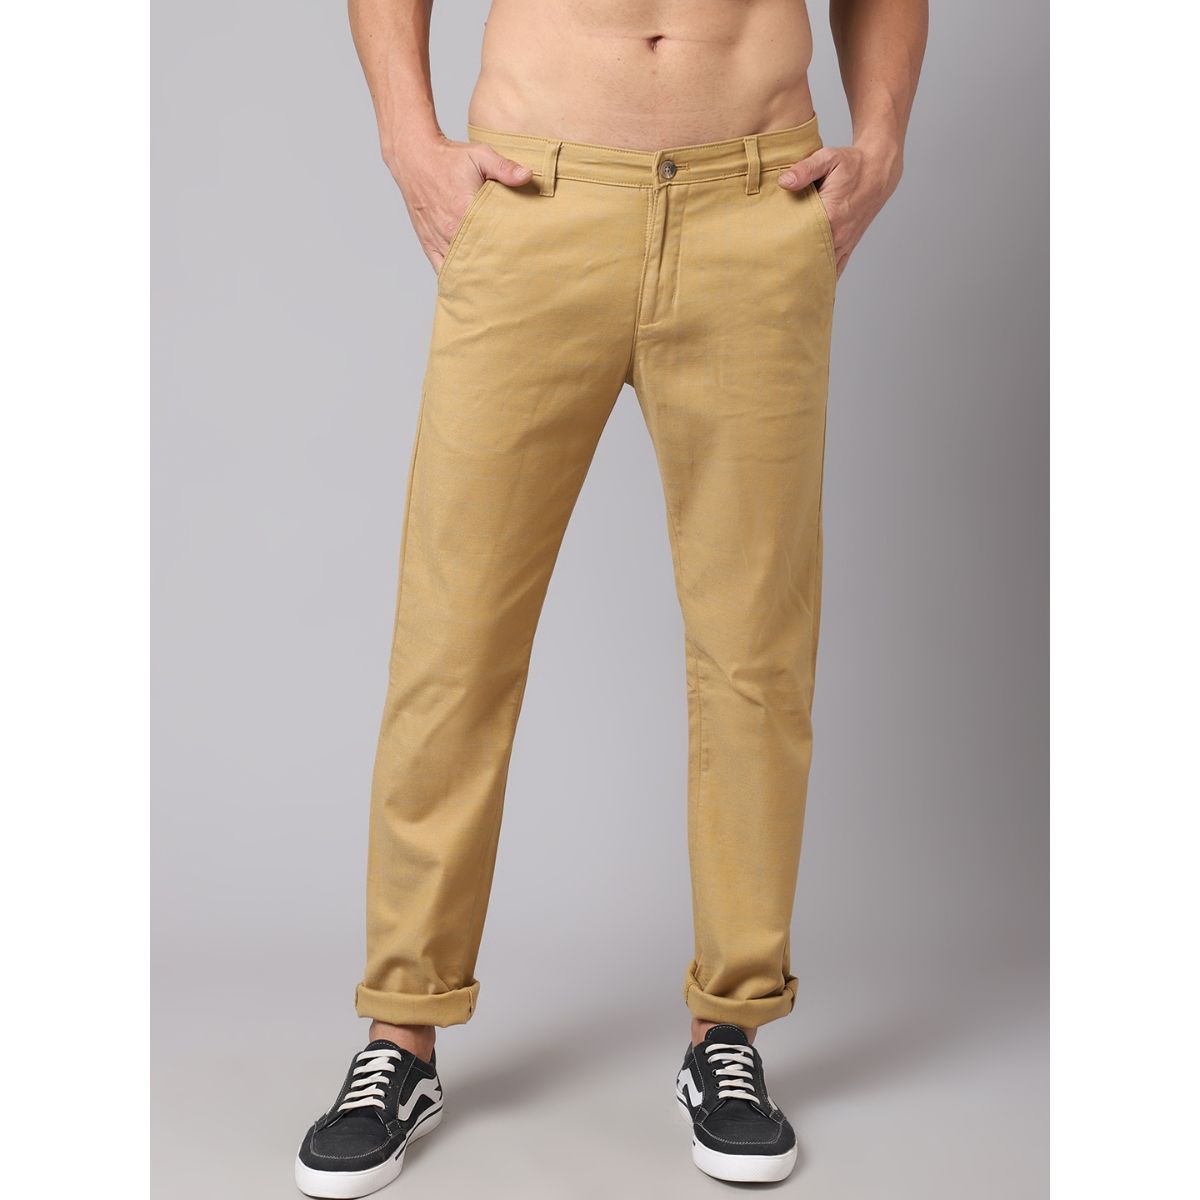 Urbano Fashion Slim Fit Men Green Trousers - Buy Olive Green Urbano Fashion  Slim Fit Men Green Trousers Online at Best Prices in India | Flipkart.com